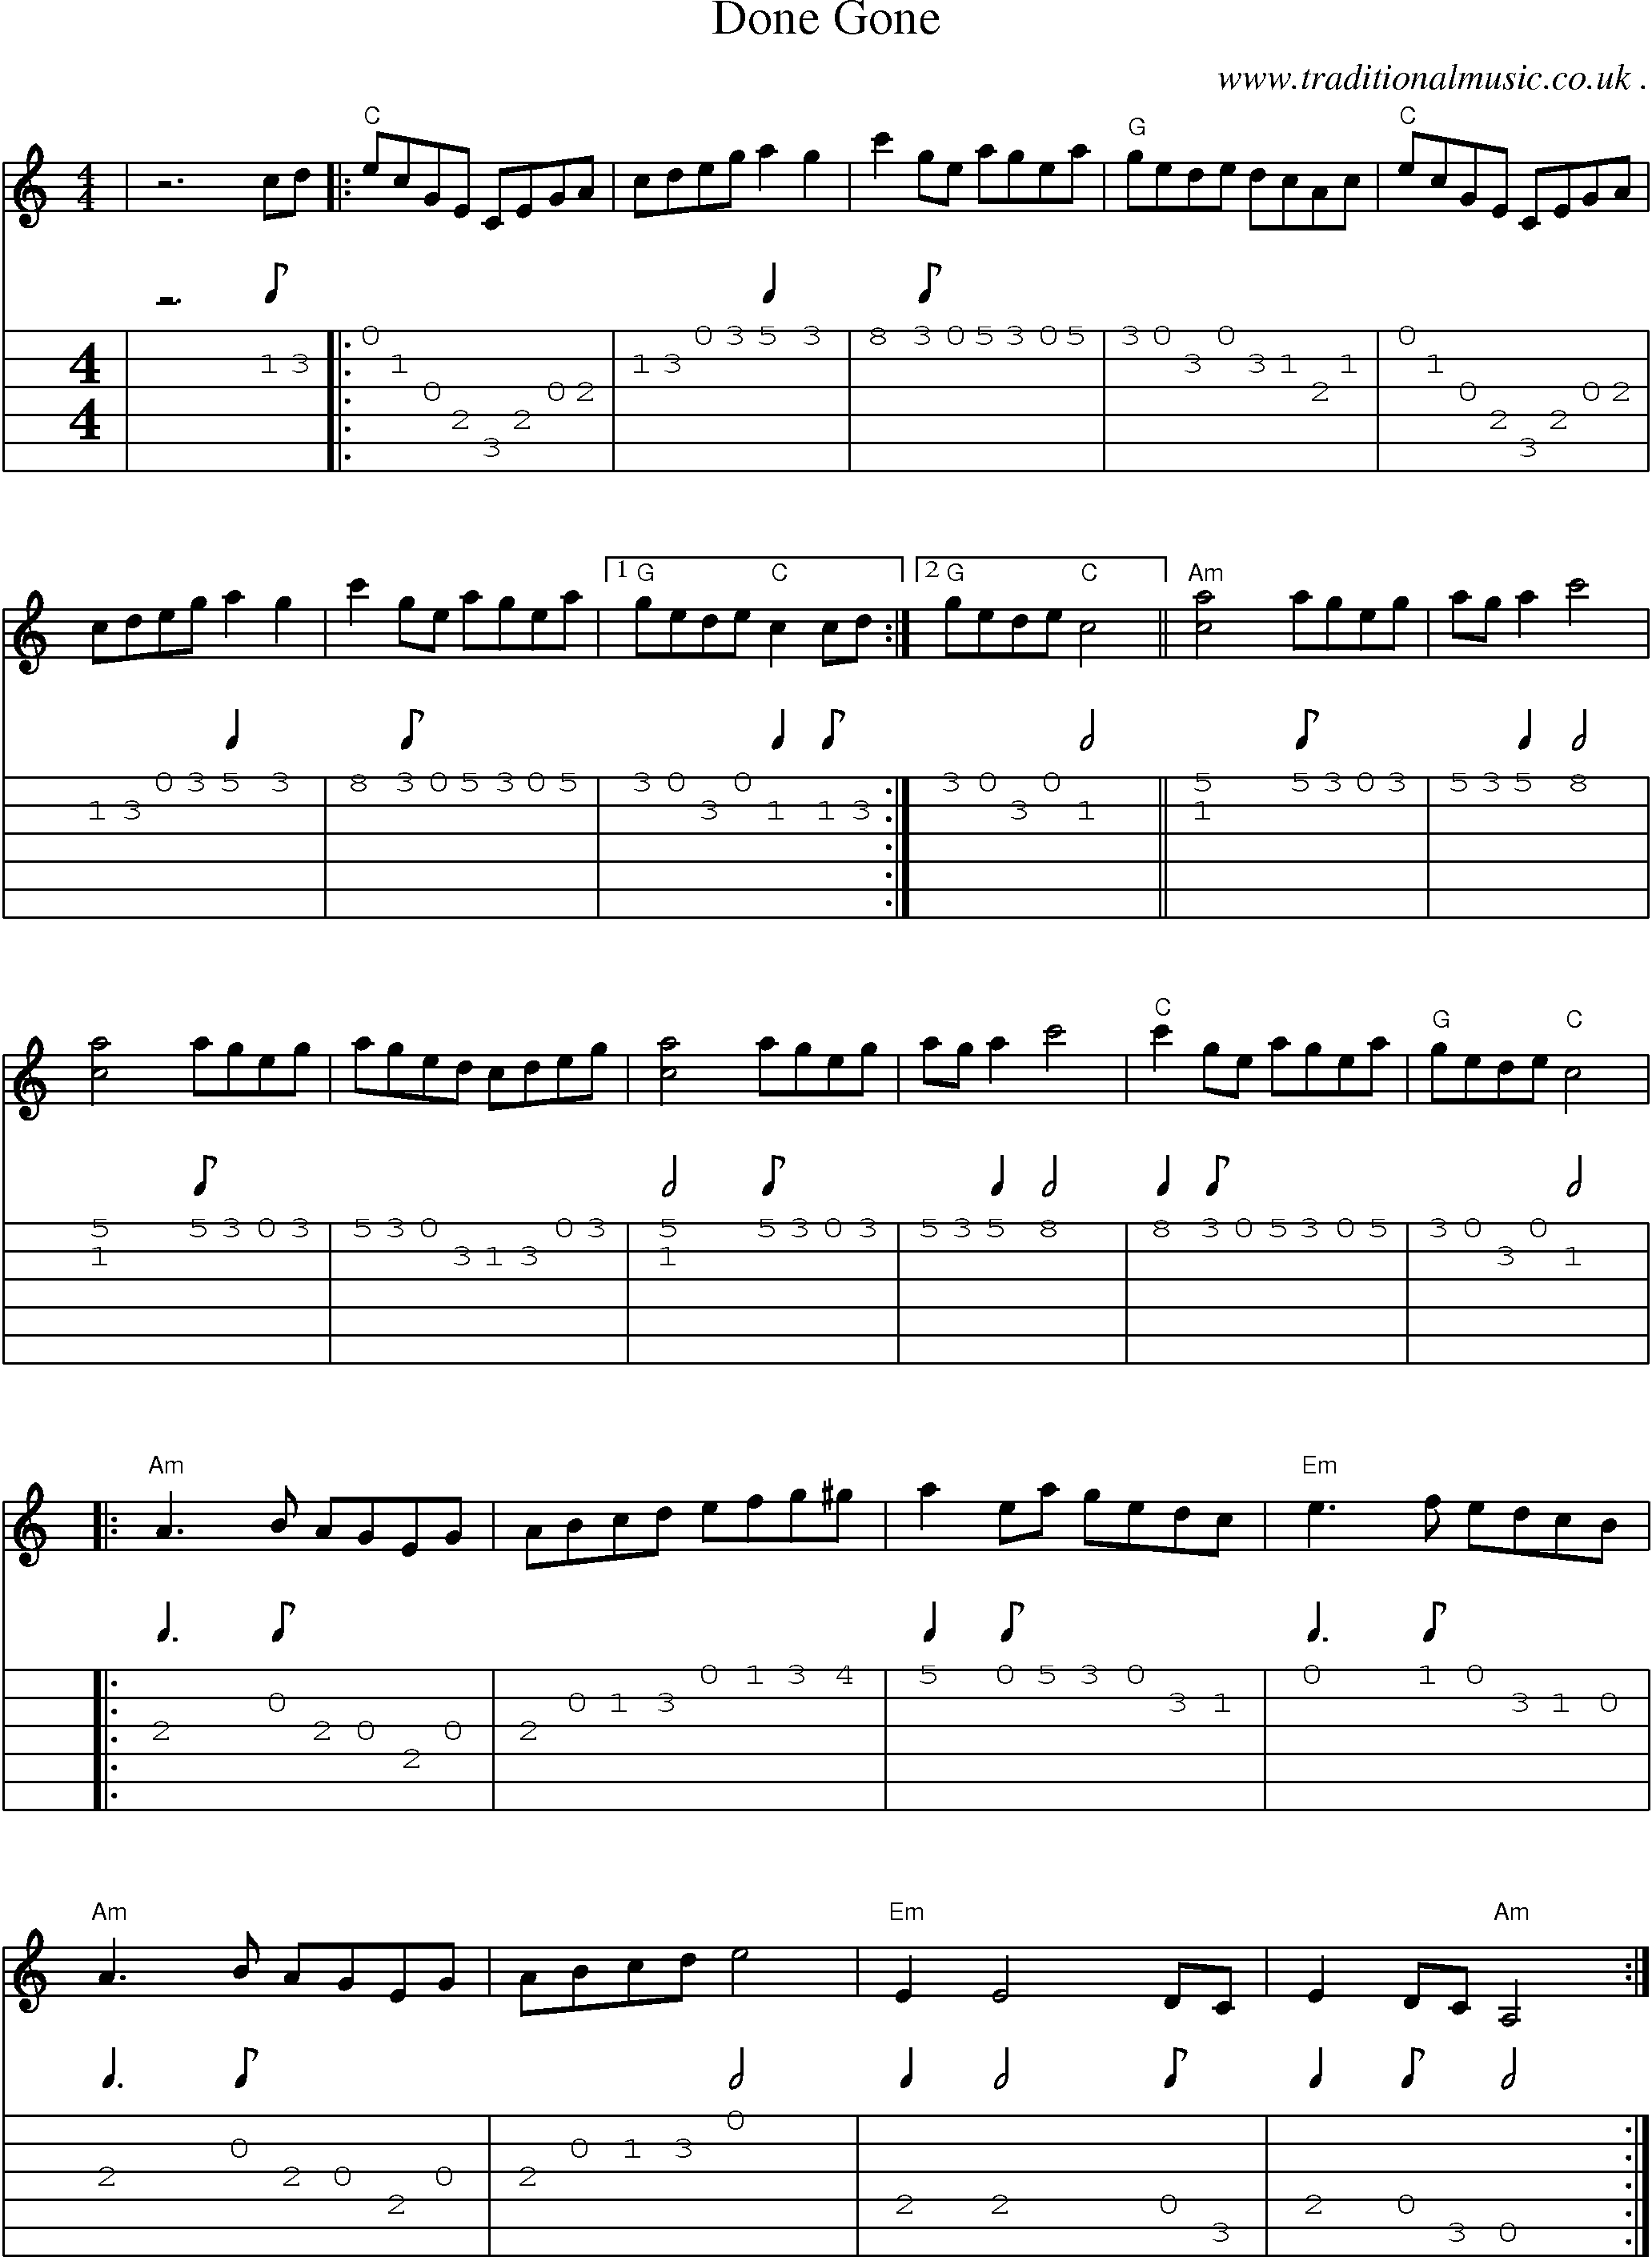 Music Score and Guitar Tabs for Done Gone